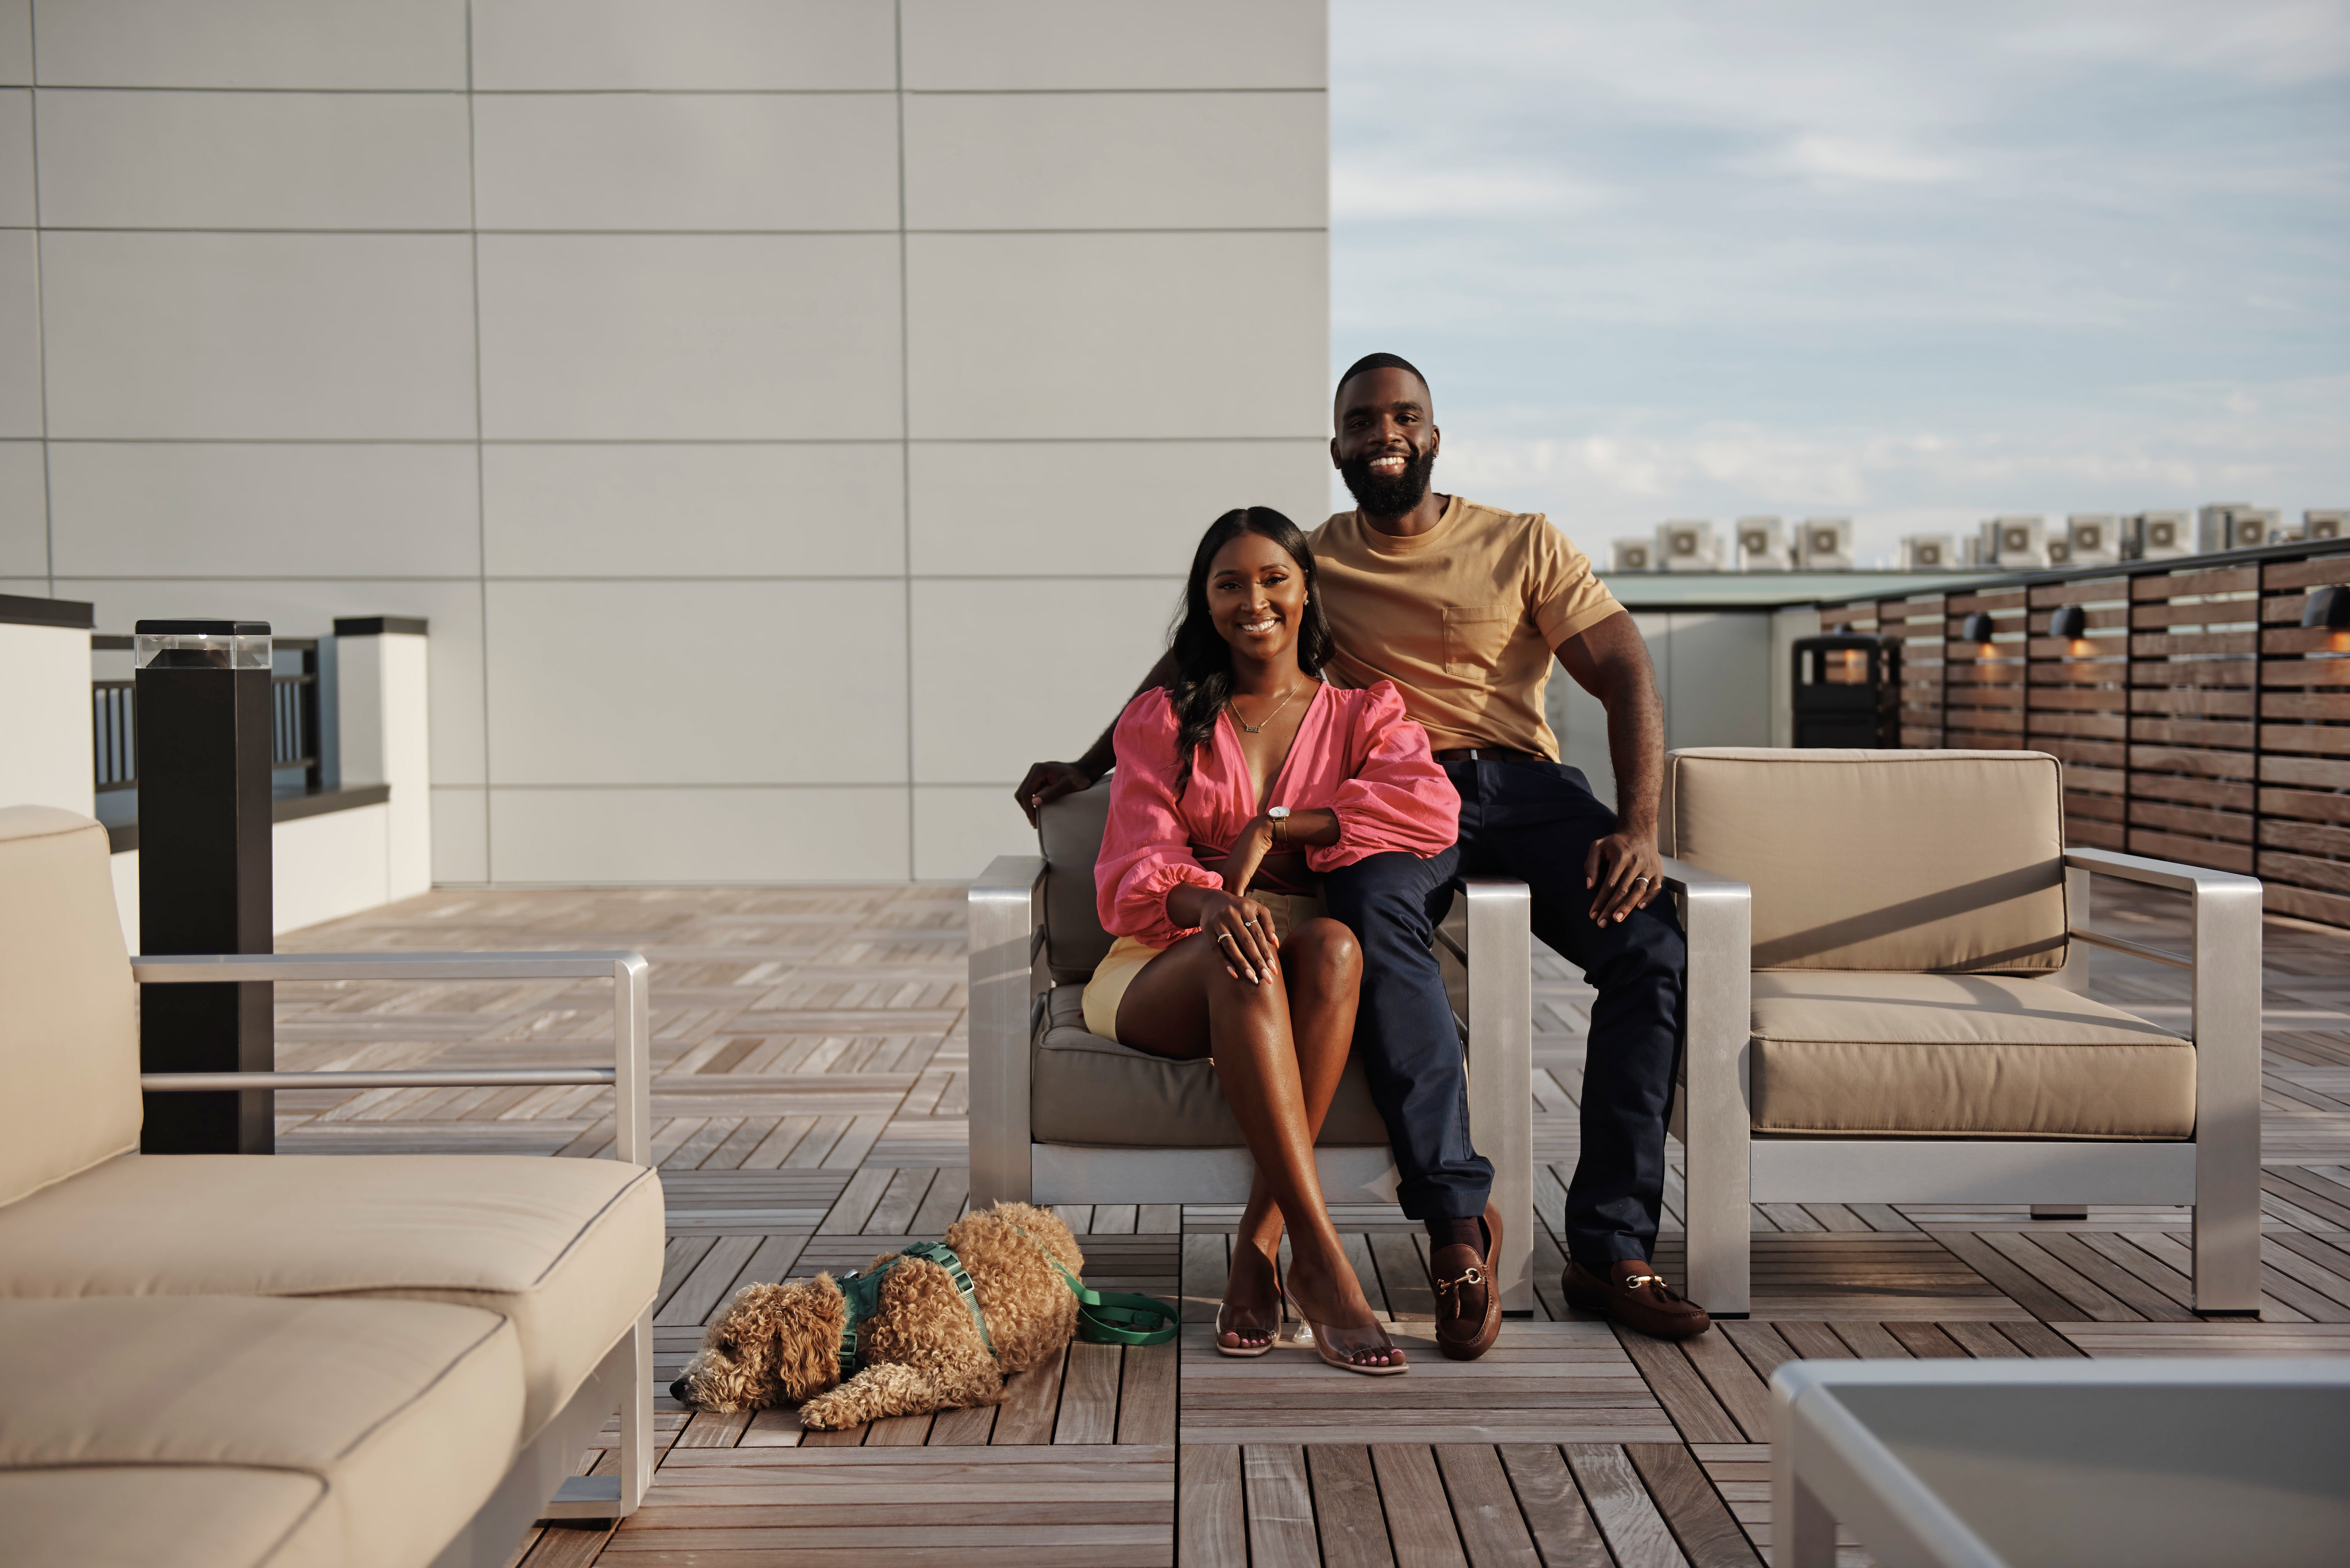 Jasmina and Michael from 'Married at First Sight' Season 14 sitting on a roof deck